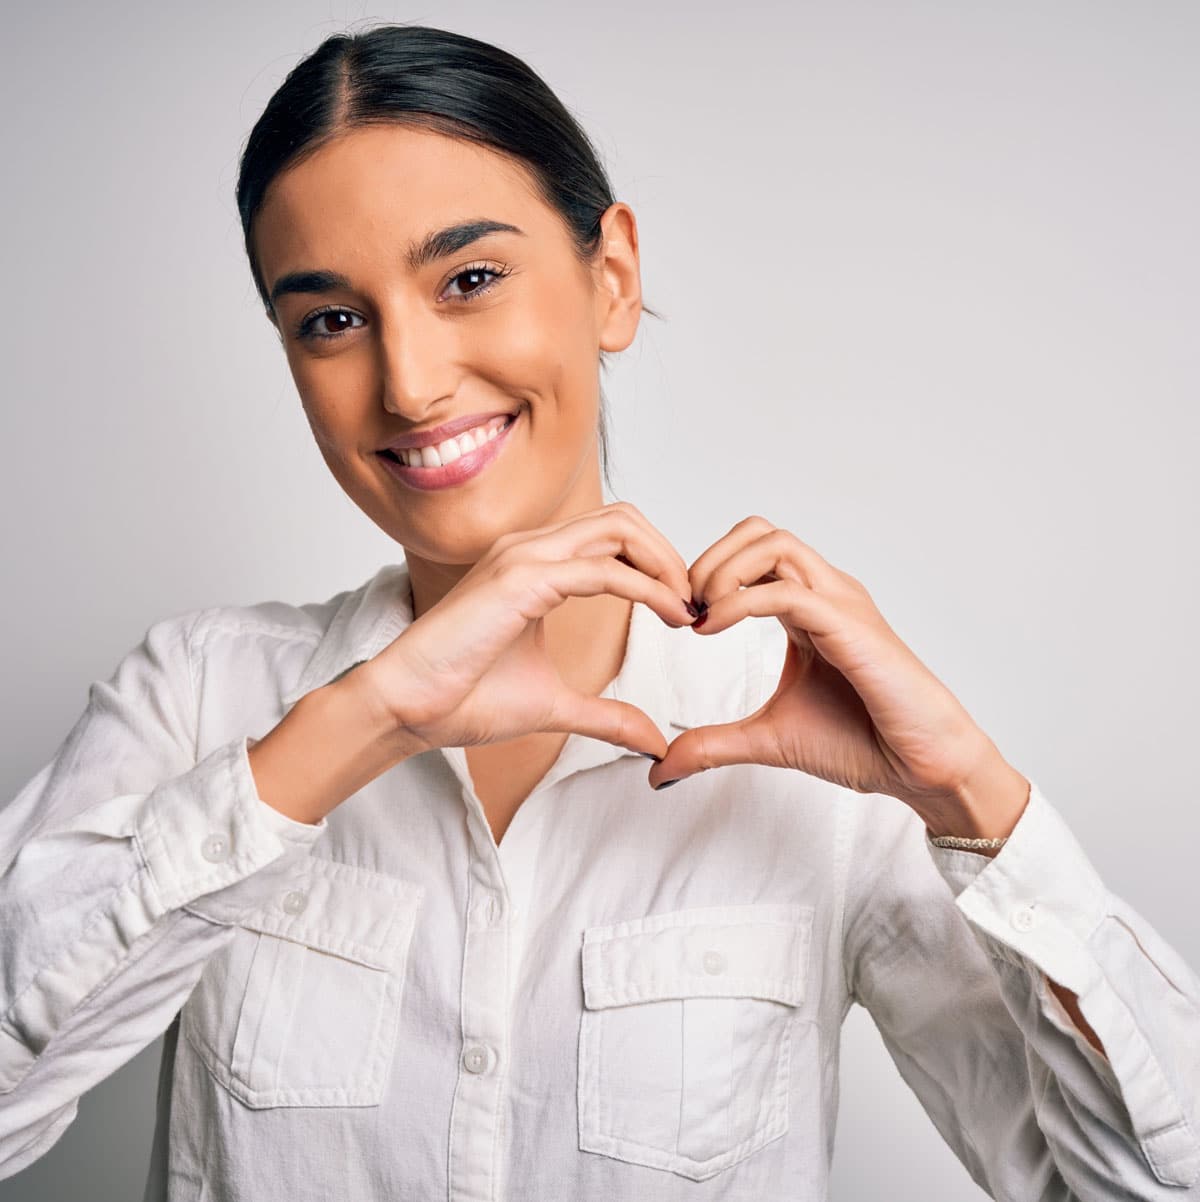 woman making heart shape with hands